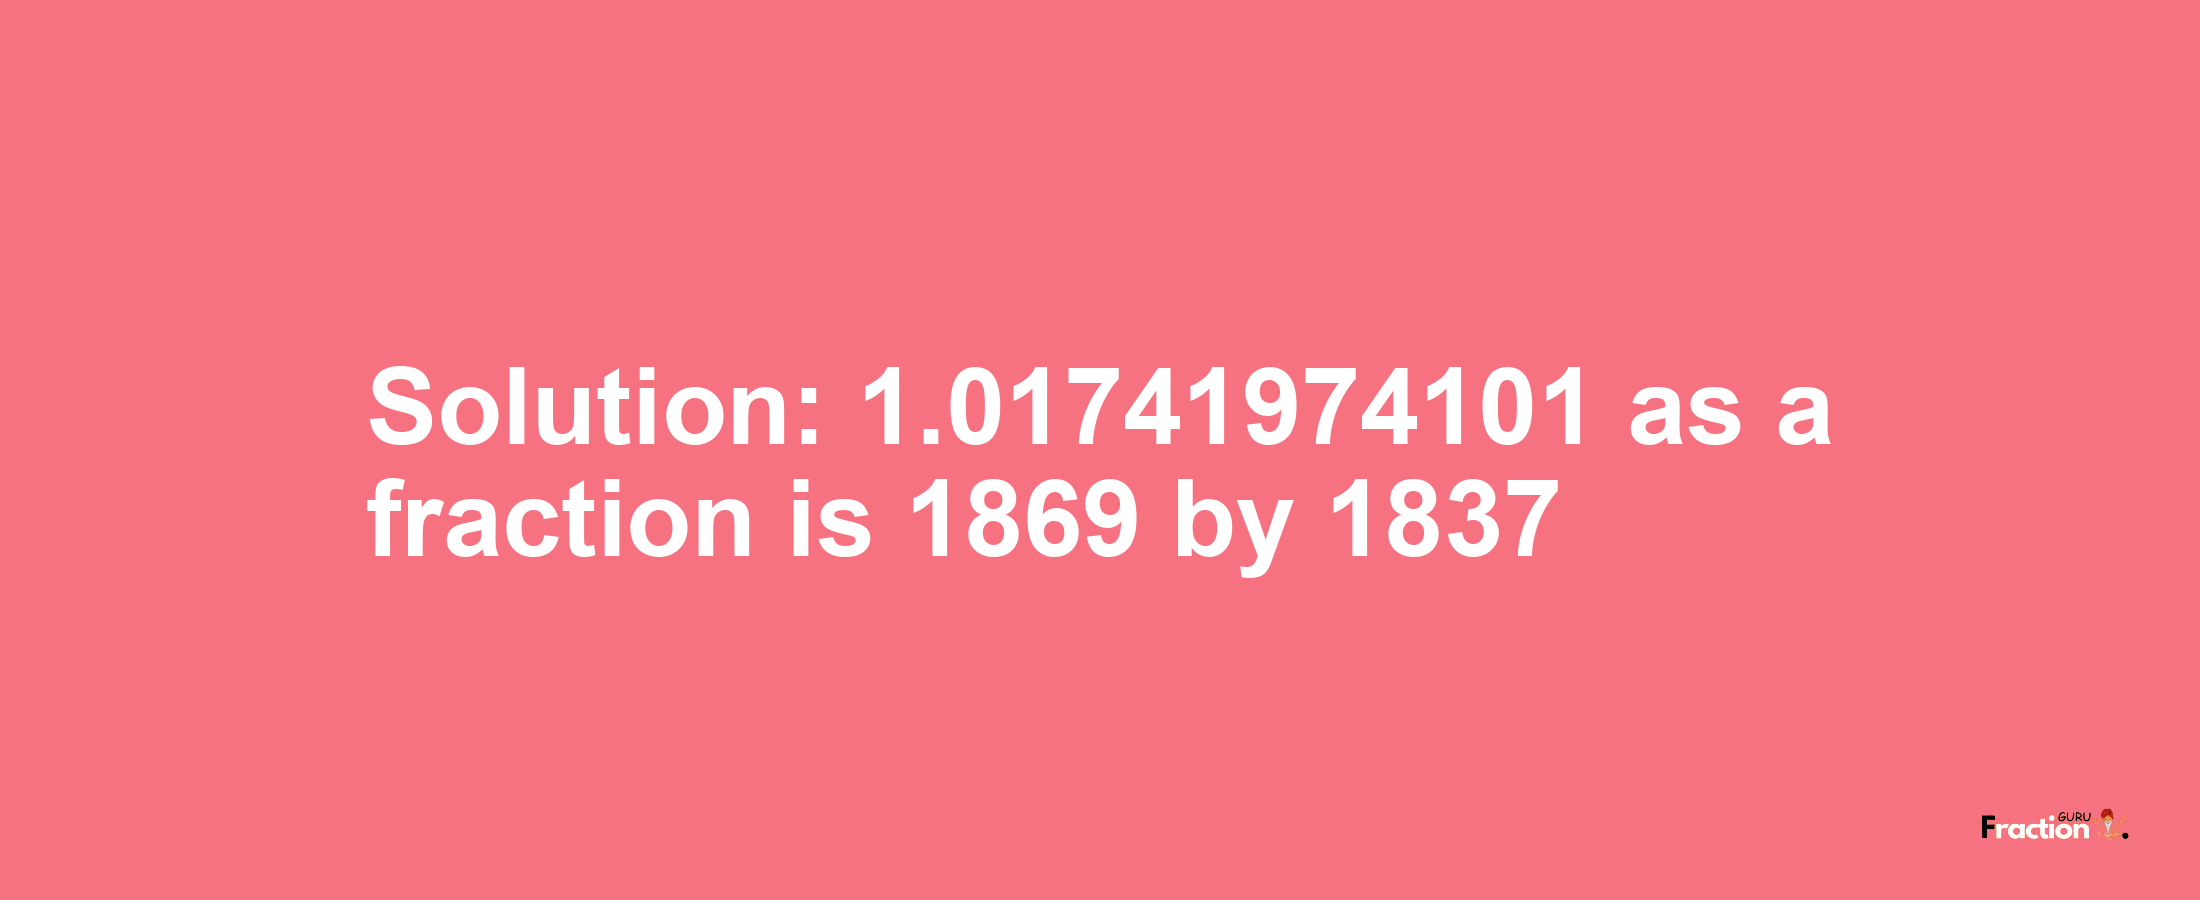 Solution:1.01741974101 as a fraction is 1869/1837